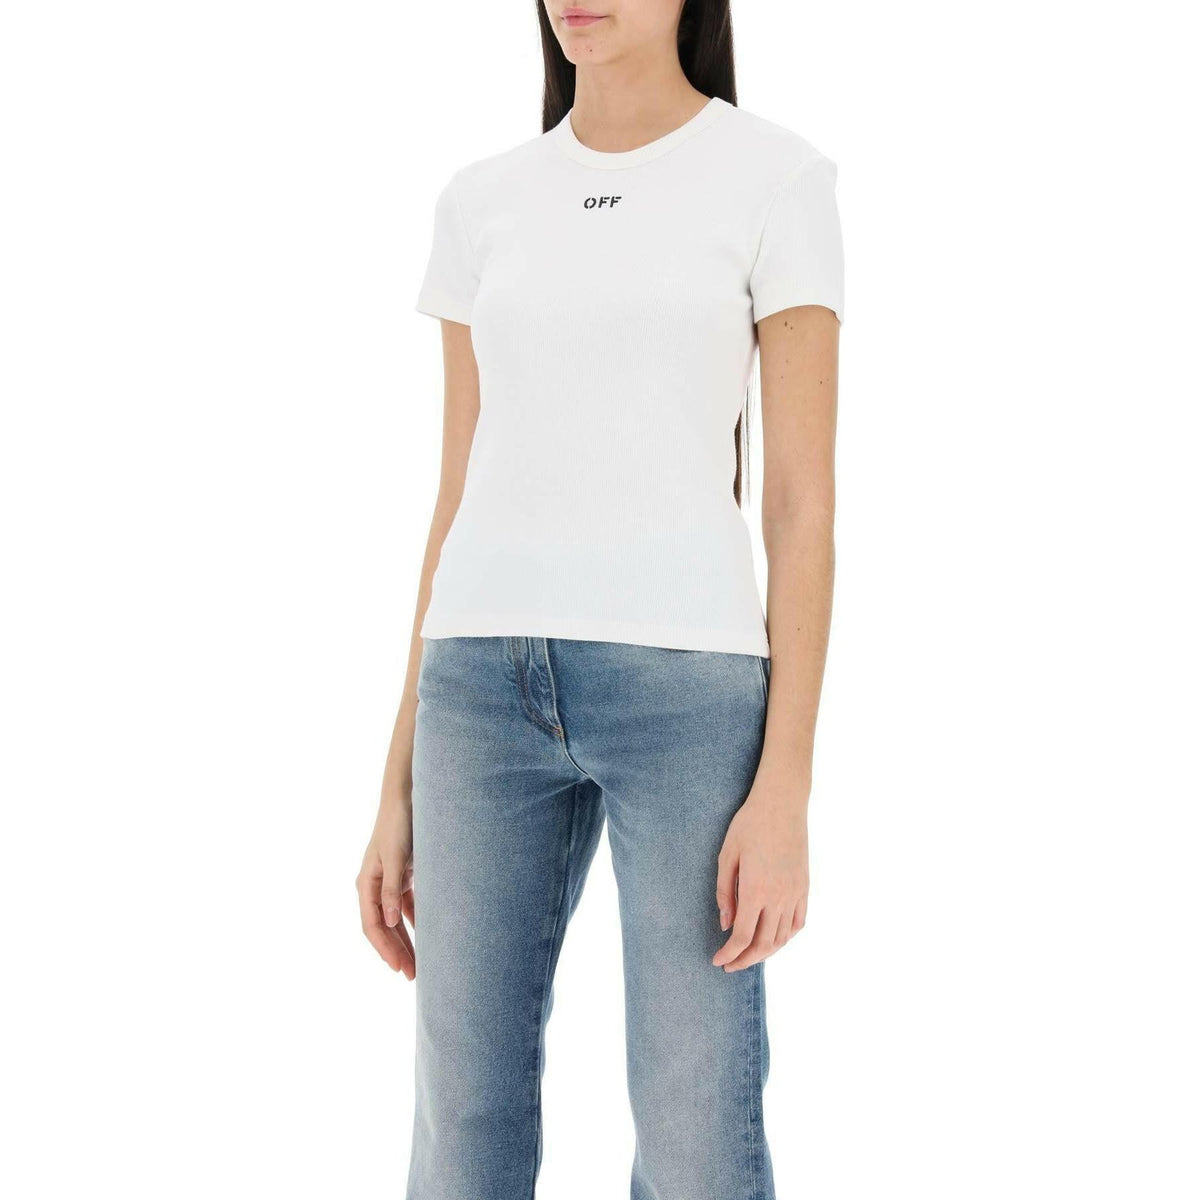 Off White Ribbed T Shirt With Off Embroidery - JOHN JULIA